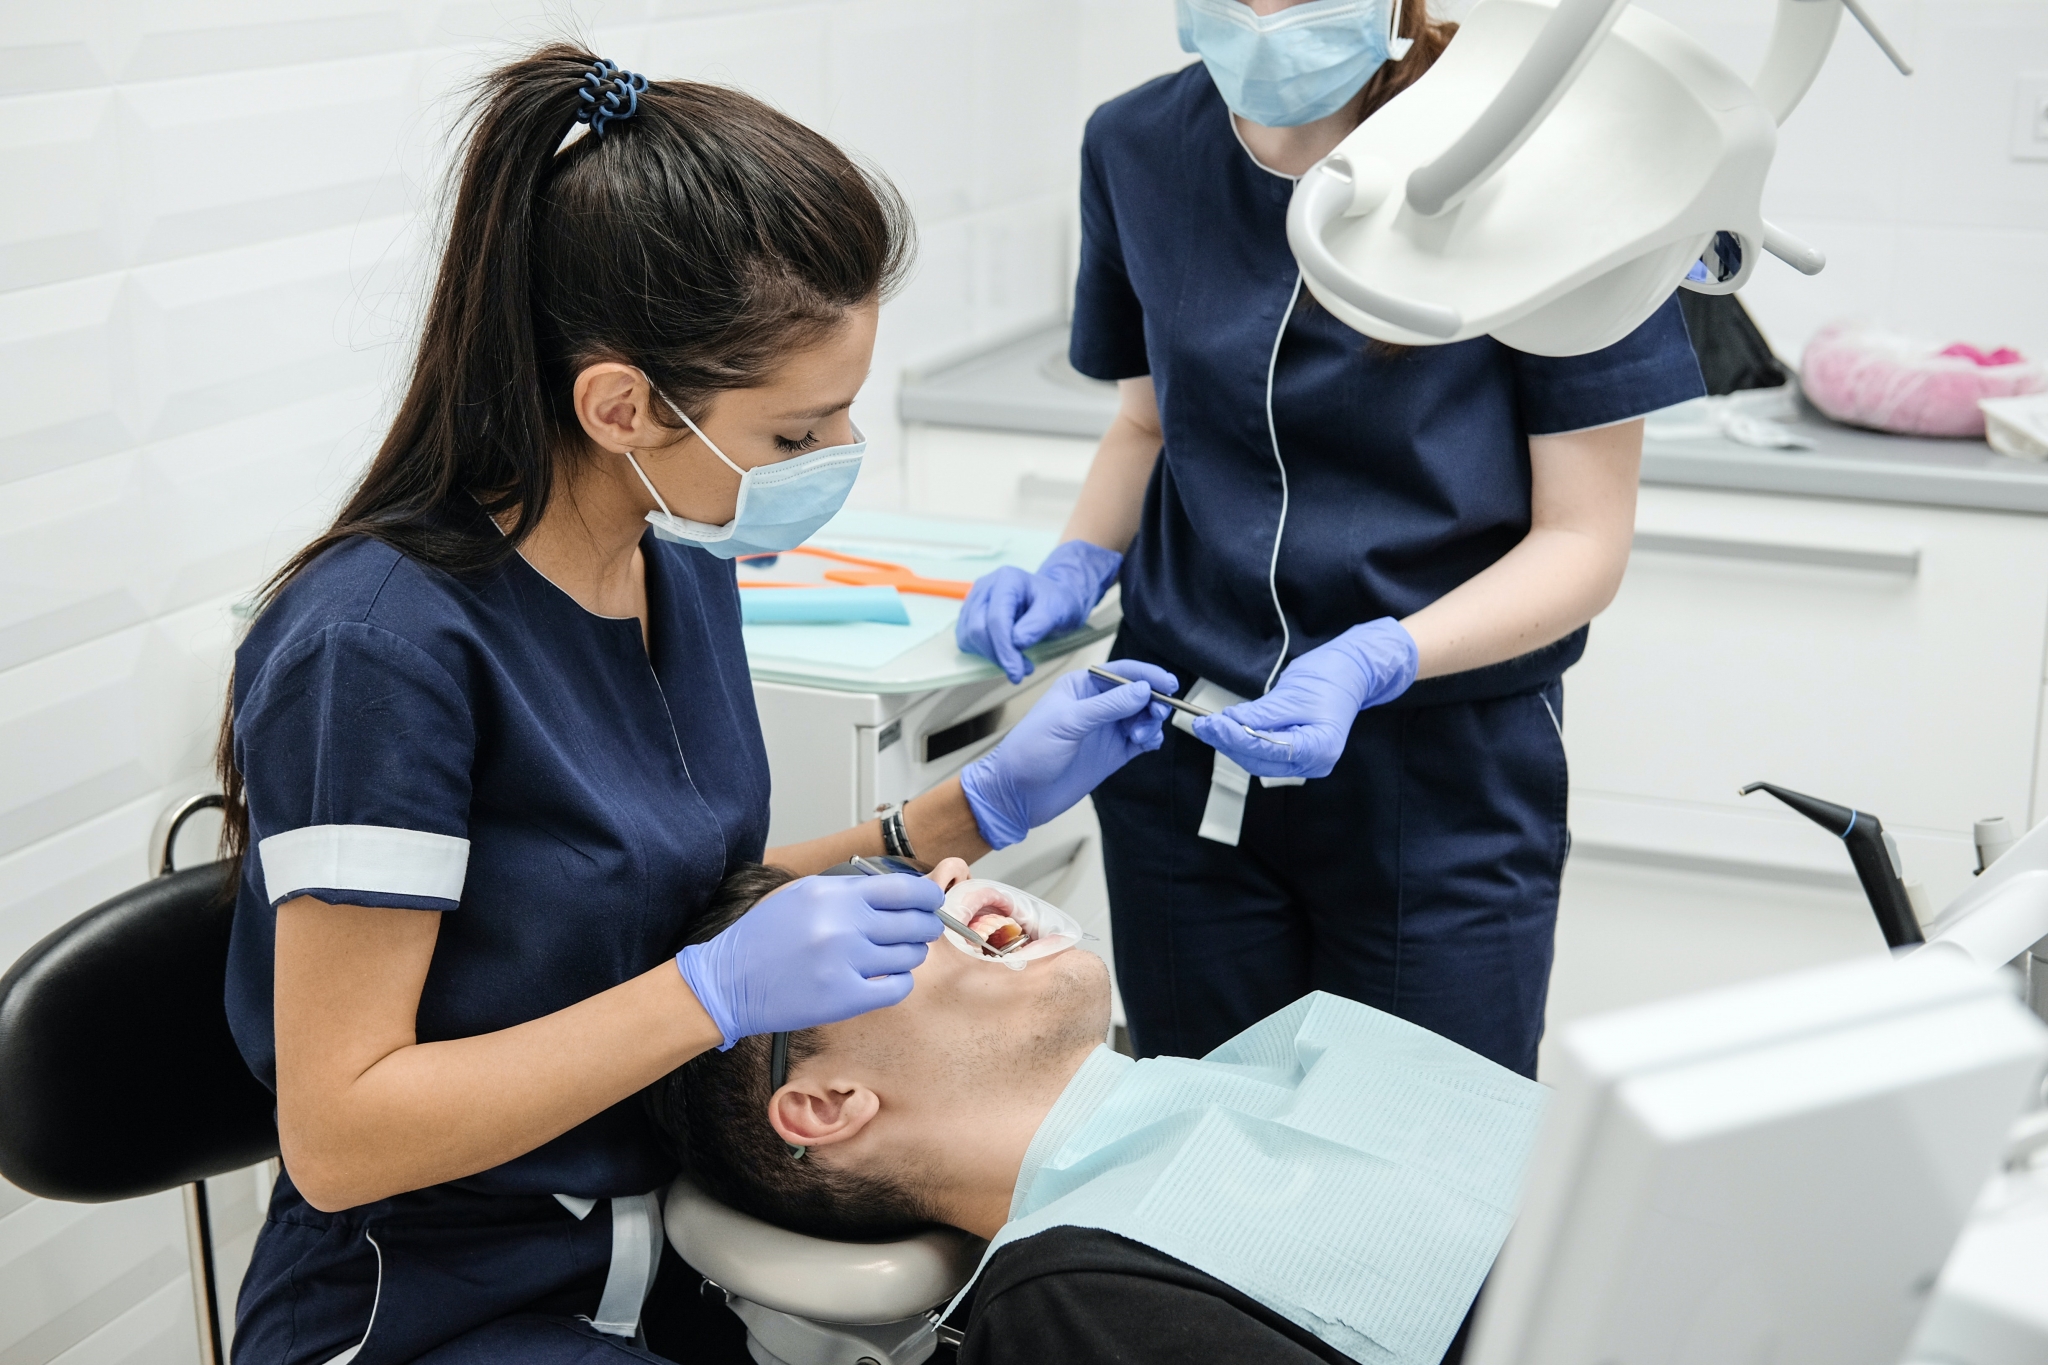 Dental Hygienist and Dental Assistant examining a patient